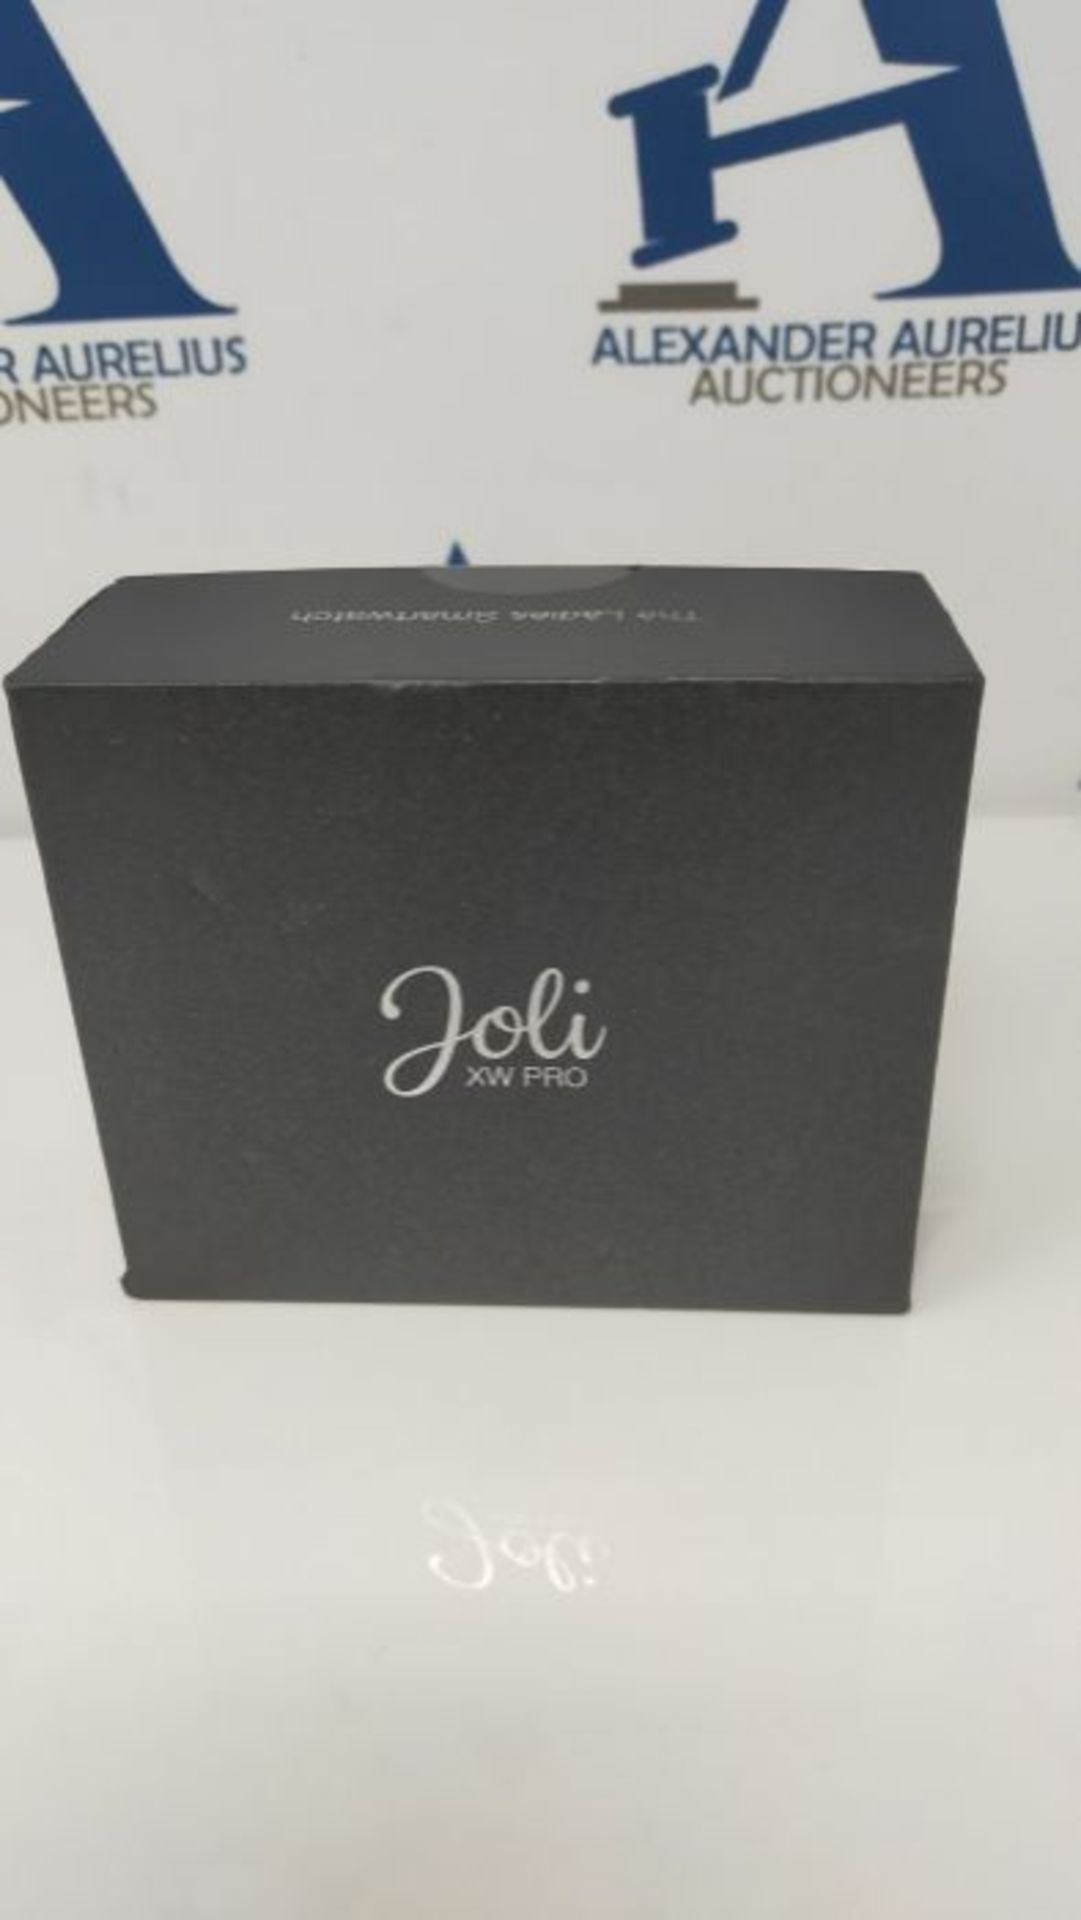 RRP £74.00 X-WATCH JOLI 2.0 XW PRO: German brand Smartwatch iOS & Android - Touch screen fashion - Image 2 of 3